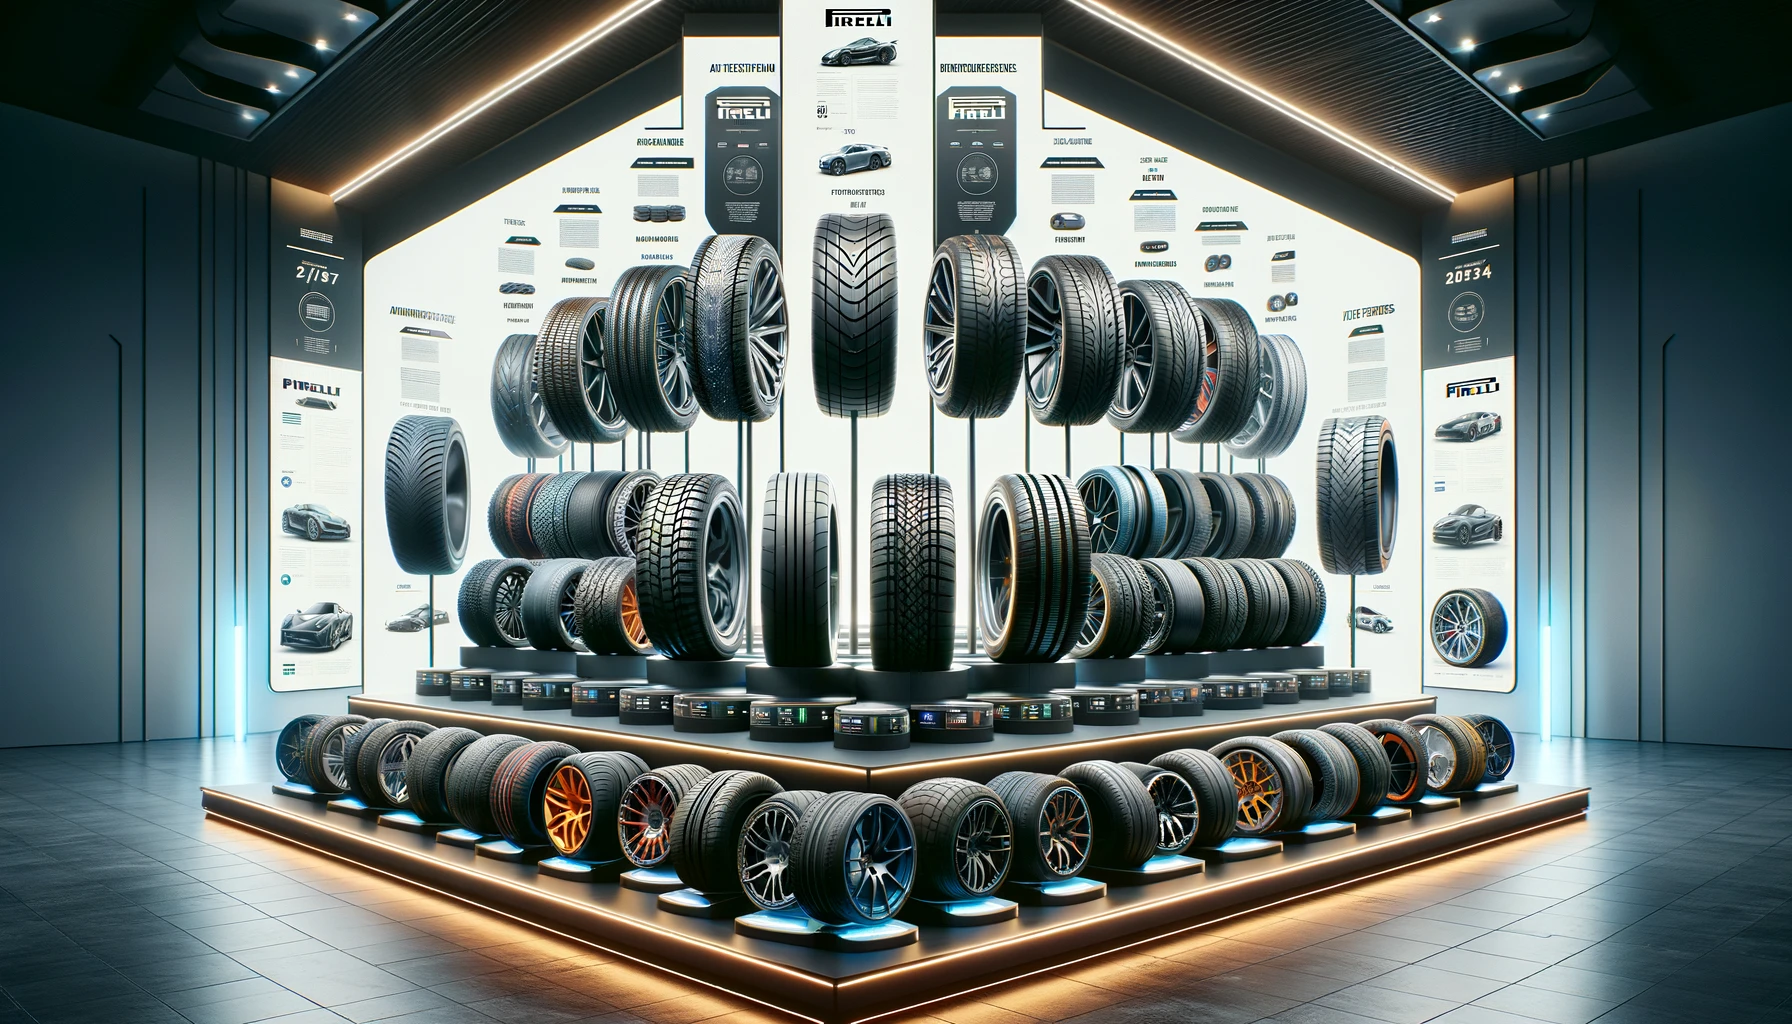 A visually engaging display of Pirelli's diverse tire product lineup. The image features a range of Pirelli tires arranged in a sleek, modern showroom setting. Each tire type, from high-performance sports tires to rugged winter tires and eco-friendly options, is prominently displayed on stylish stands with informational tags describing their unique features and applications. The background is elegant and futuristic, enhancing the advanced technology and variety of Pirelli's offerings. The scene conveys the broad and specialized range of Pirelli tires, catering to different driving needs and conditions. The image is in a 16:9 aspect ratio.